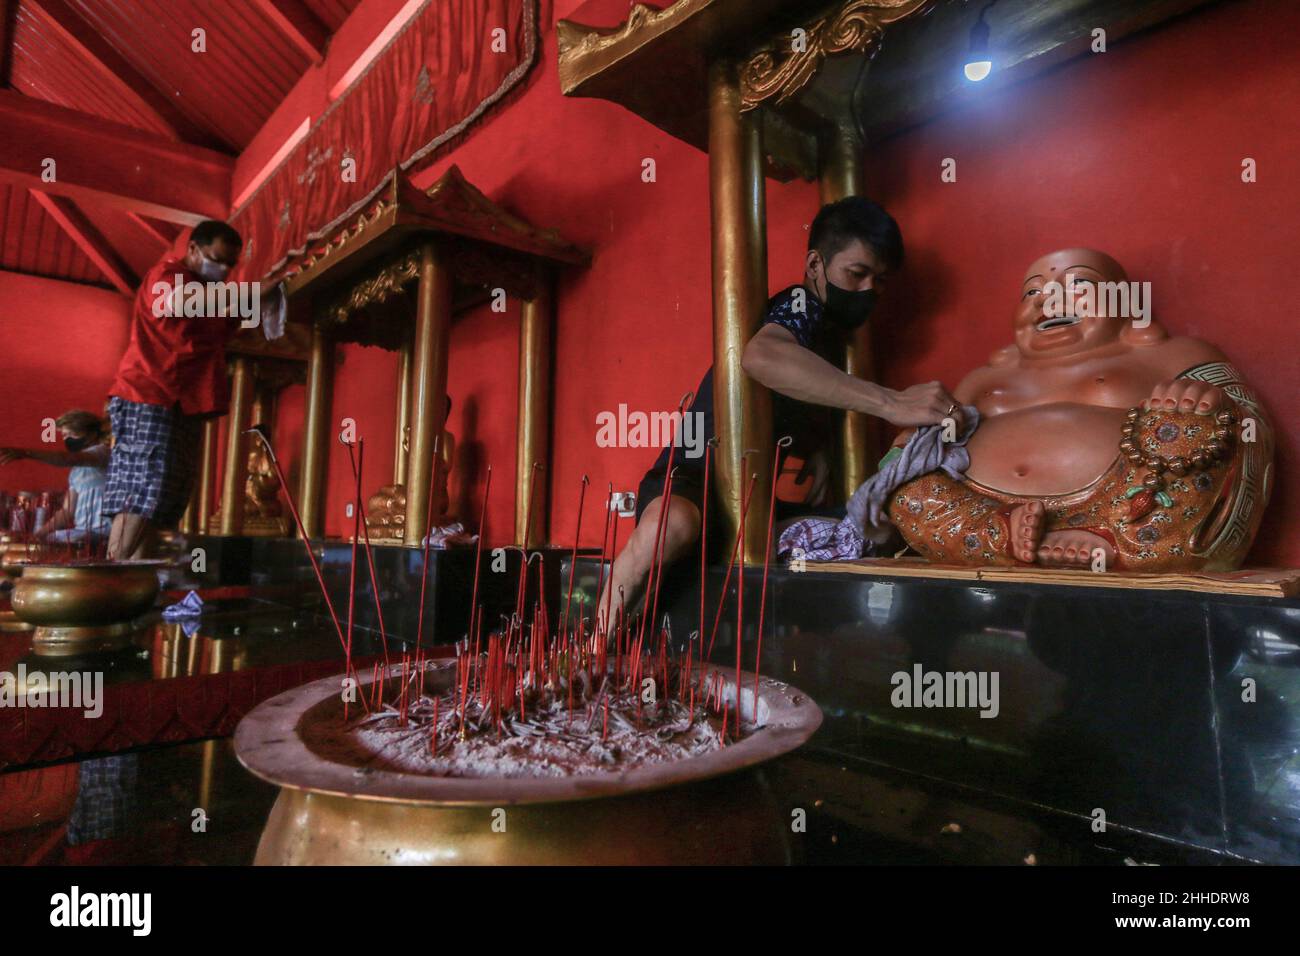 the tradition of cleaning altars and statues of gods at the Buddhist Dharma & 8 Pho Sat monastery welcoming the Chinese New Year in Bogor, Indonesia Stock Photo